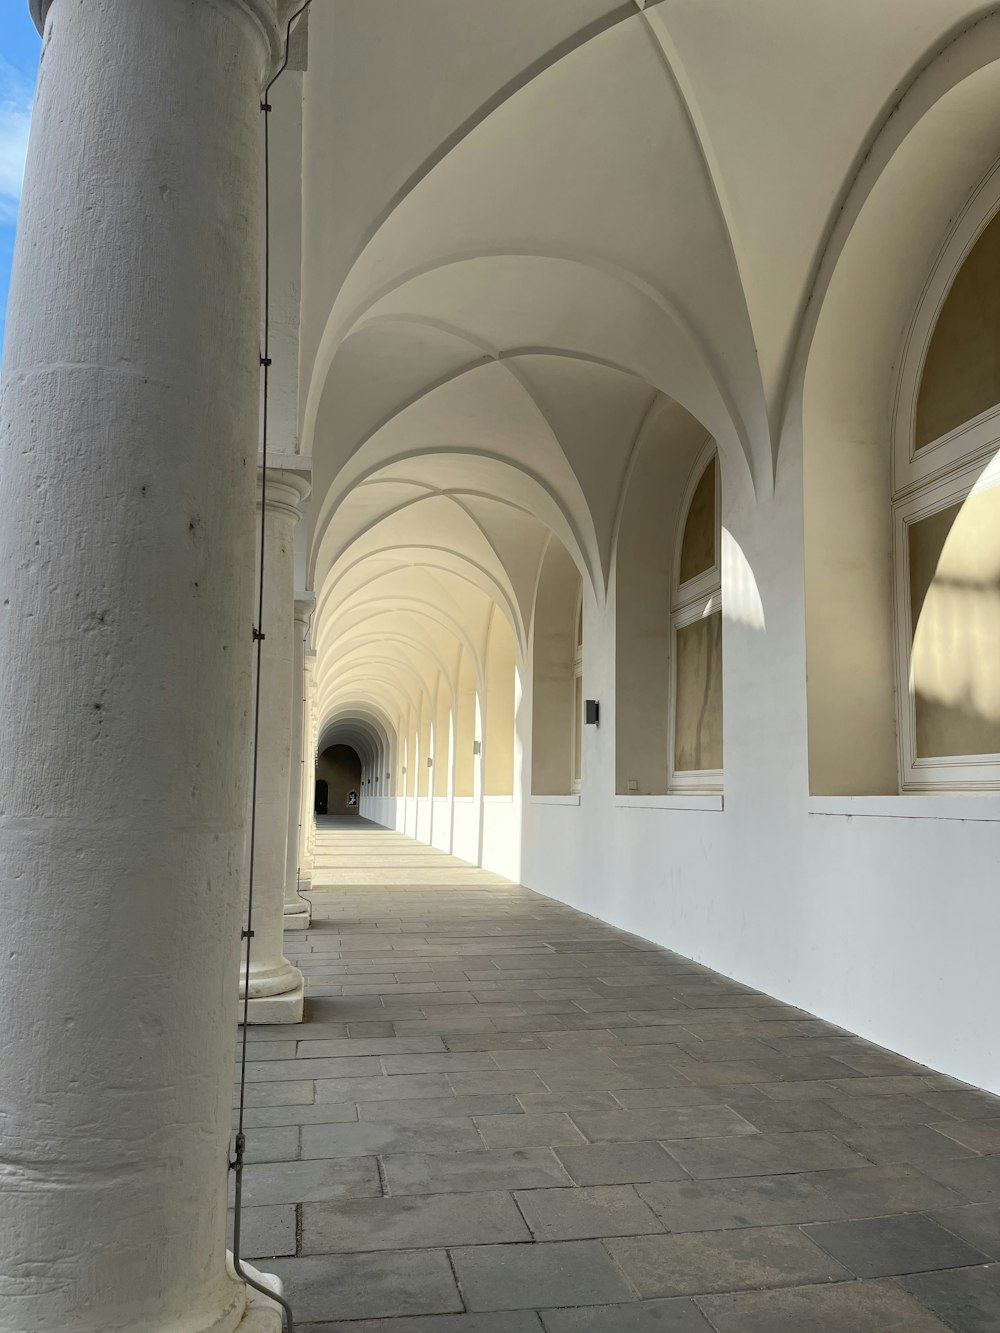 a long white building with arches and windows